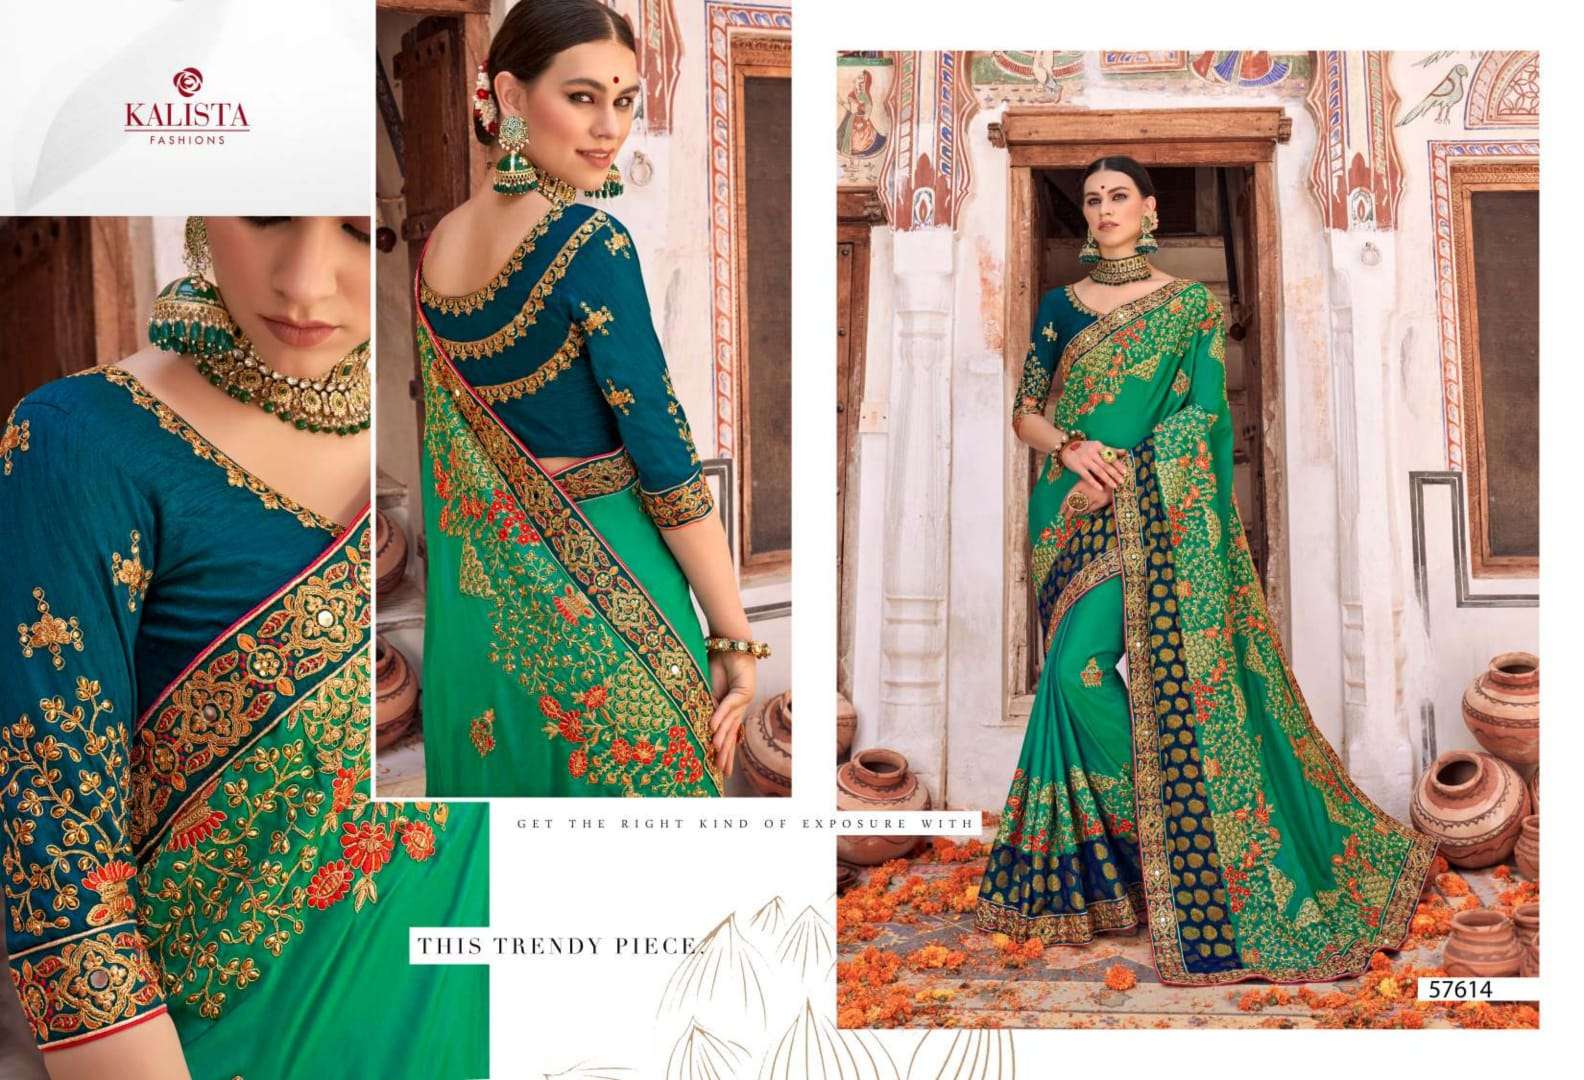 MALLIKA PLATINUM EDITION BY KALISTA FASHION 57612 TO 57617 SERIES INDIAN TRADITIONAL WEAR COLLECTION BEAUTIFUL STYLISH FANCY COLORFUL PARTY WEAR & OCCASIONAL WEAR VISCOSE SILK SAREES AT WHOLESALE PRICE